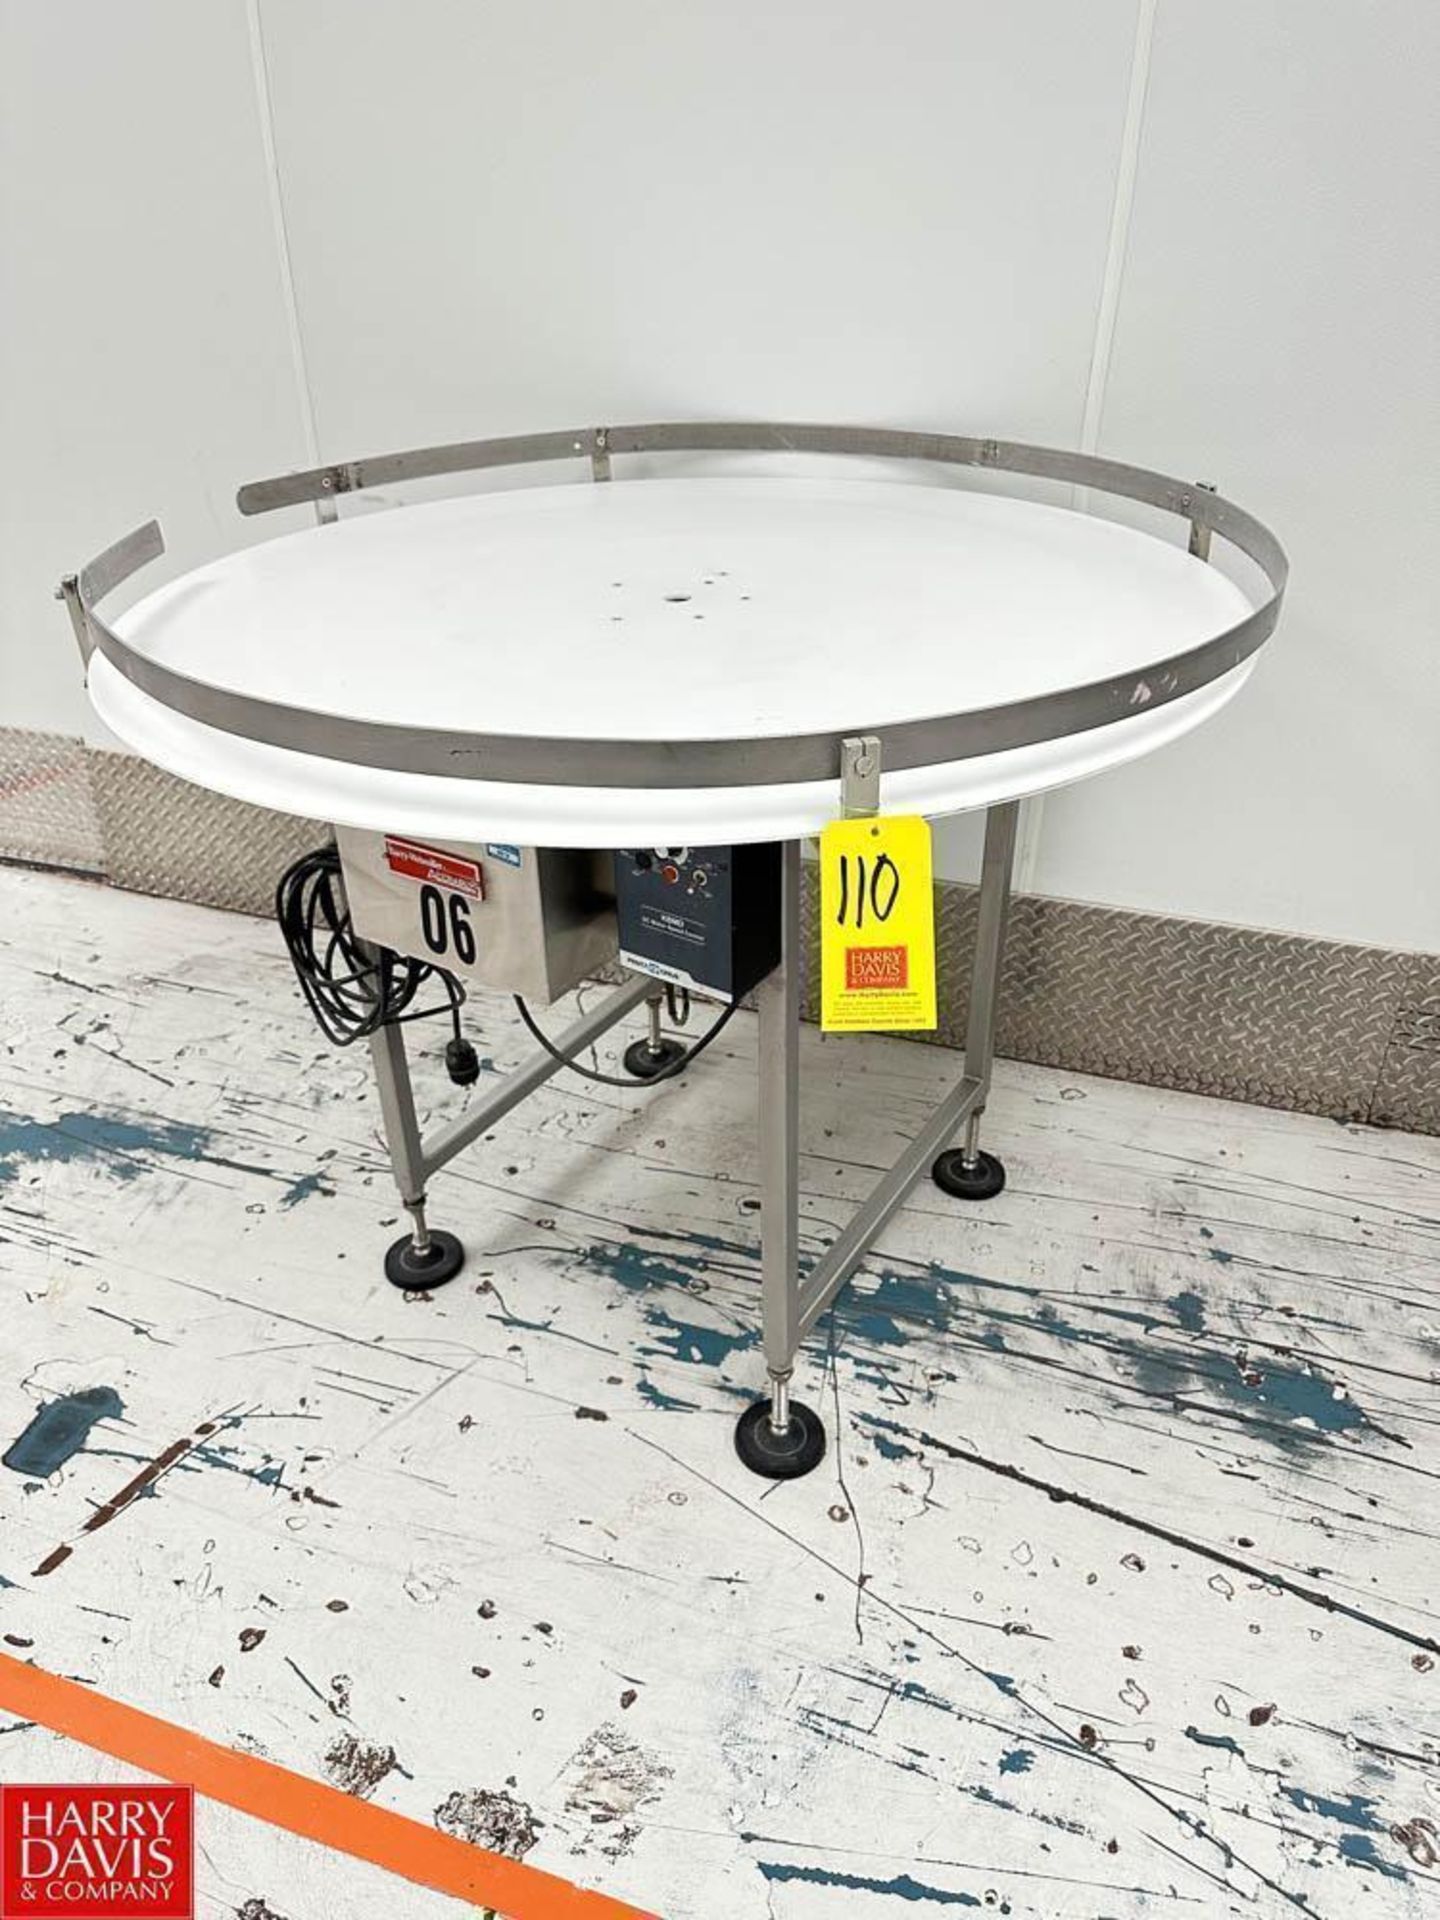 S/S Frame Rotary Accumulation Table, Dimensions = 48" Diameter - Rigging Fee: $75 - Image 2 of 2